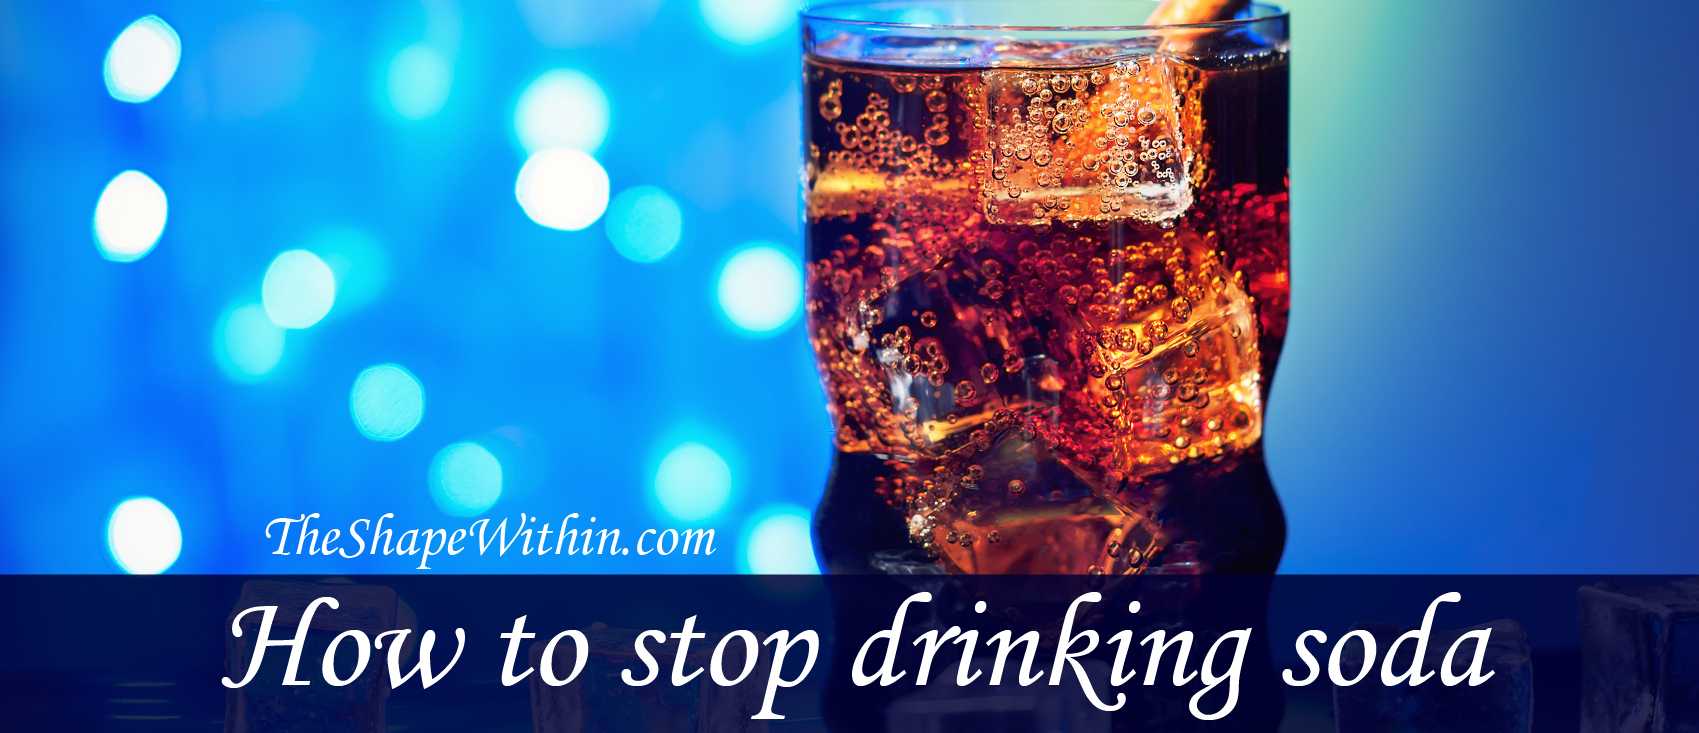 Read how to quit drinking soda gradually, by replacing it with other healthy foods and drinks